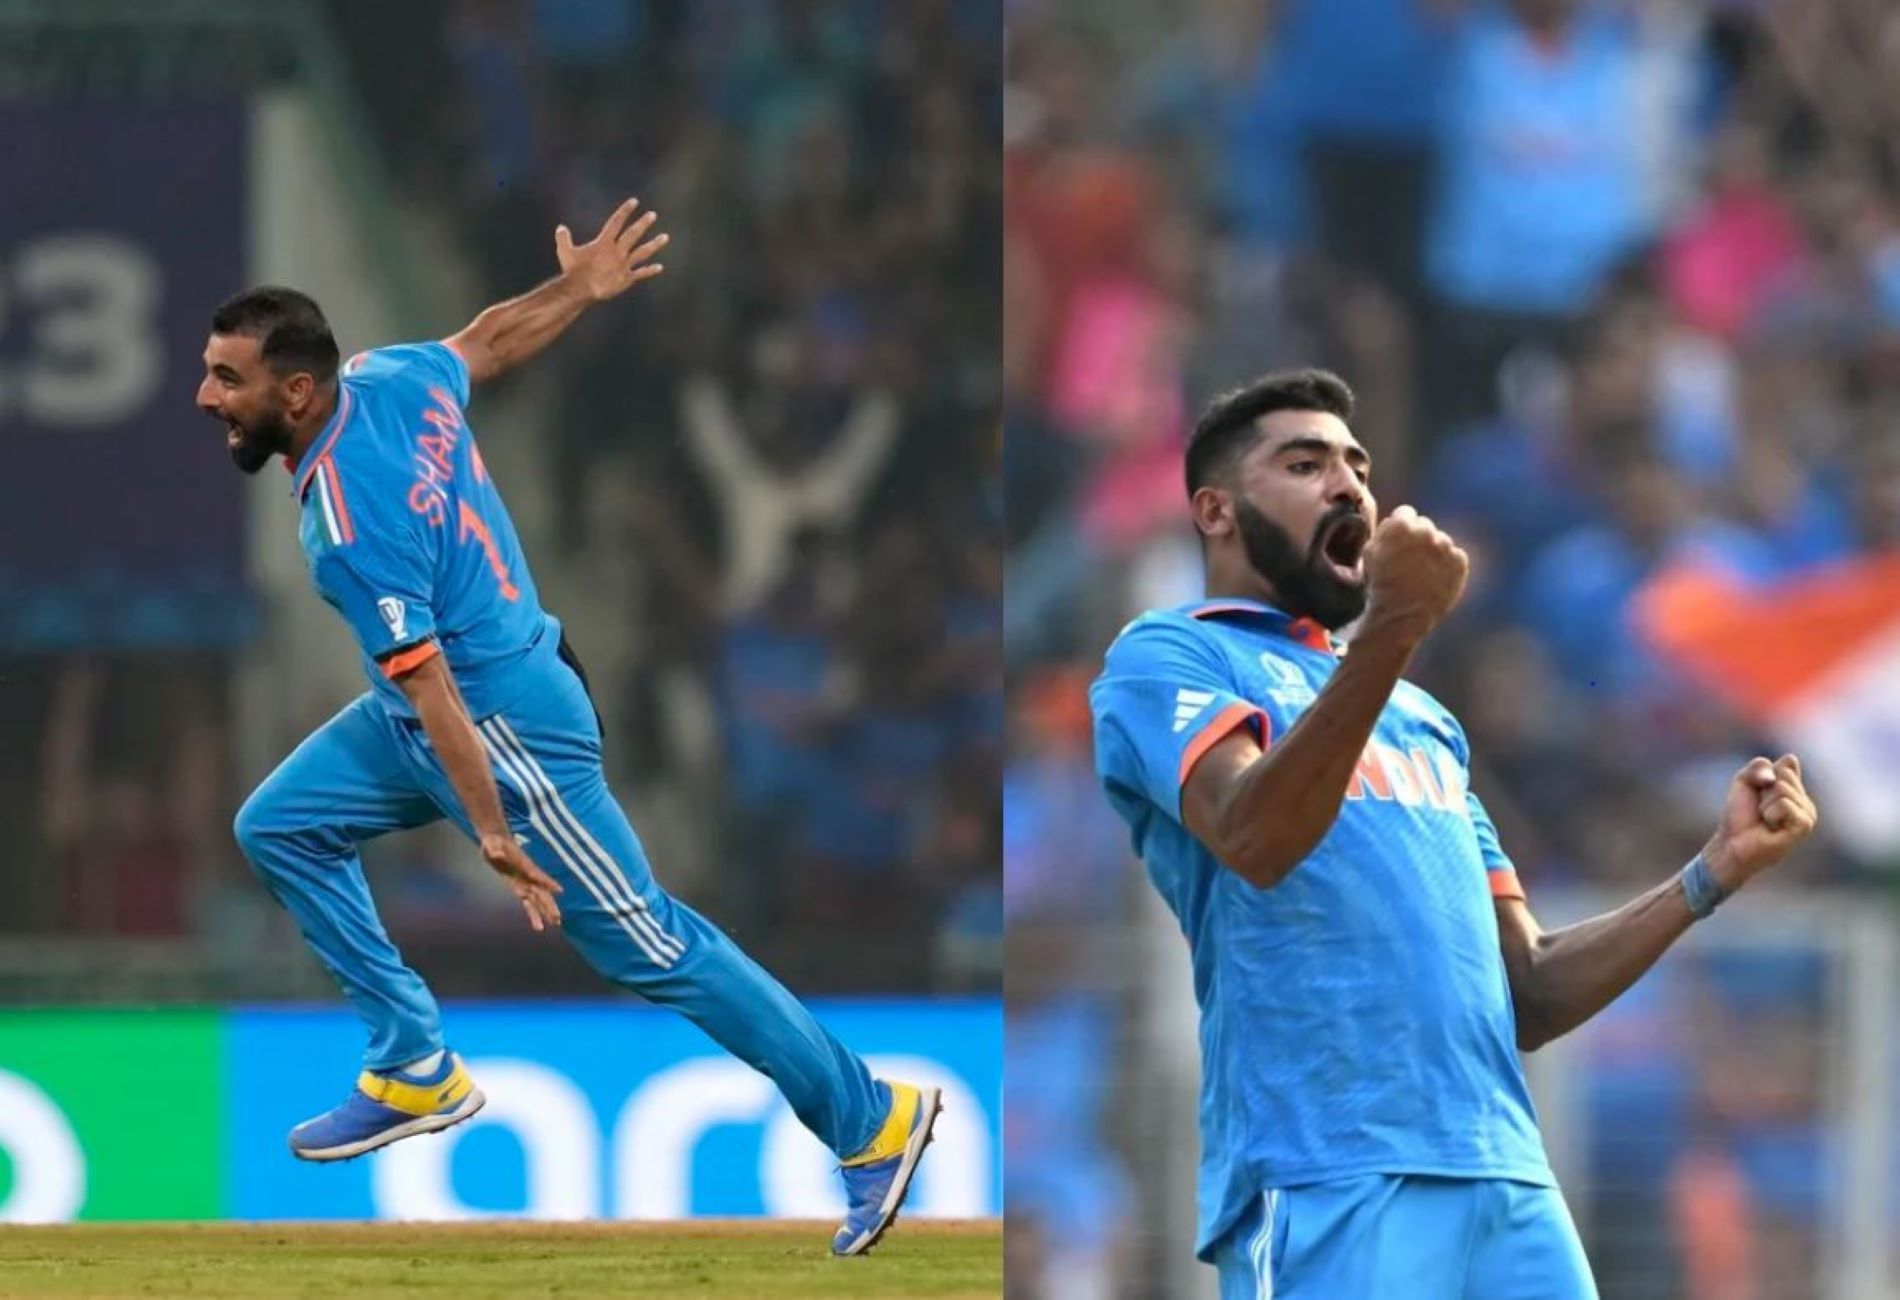 Shami has outbowled Siraj in the ongoing World Cup